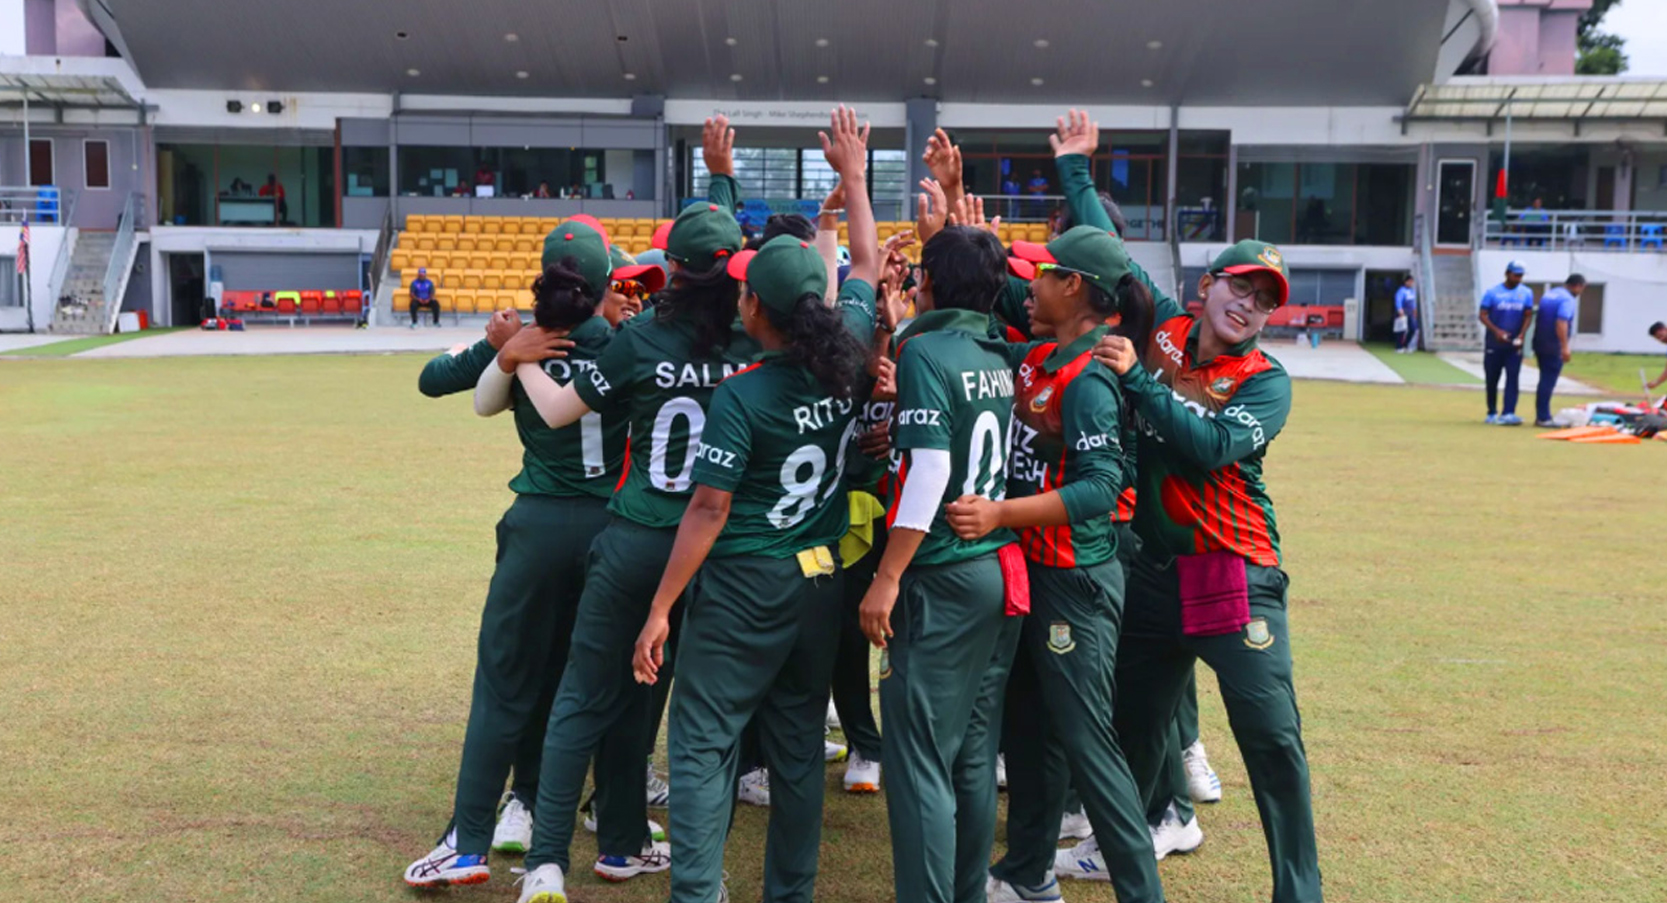 Bangladesh Women fail to qualify for the 2022 Commonwealth Games Cricket competition by 2 points